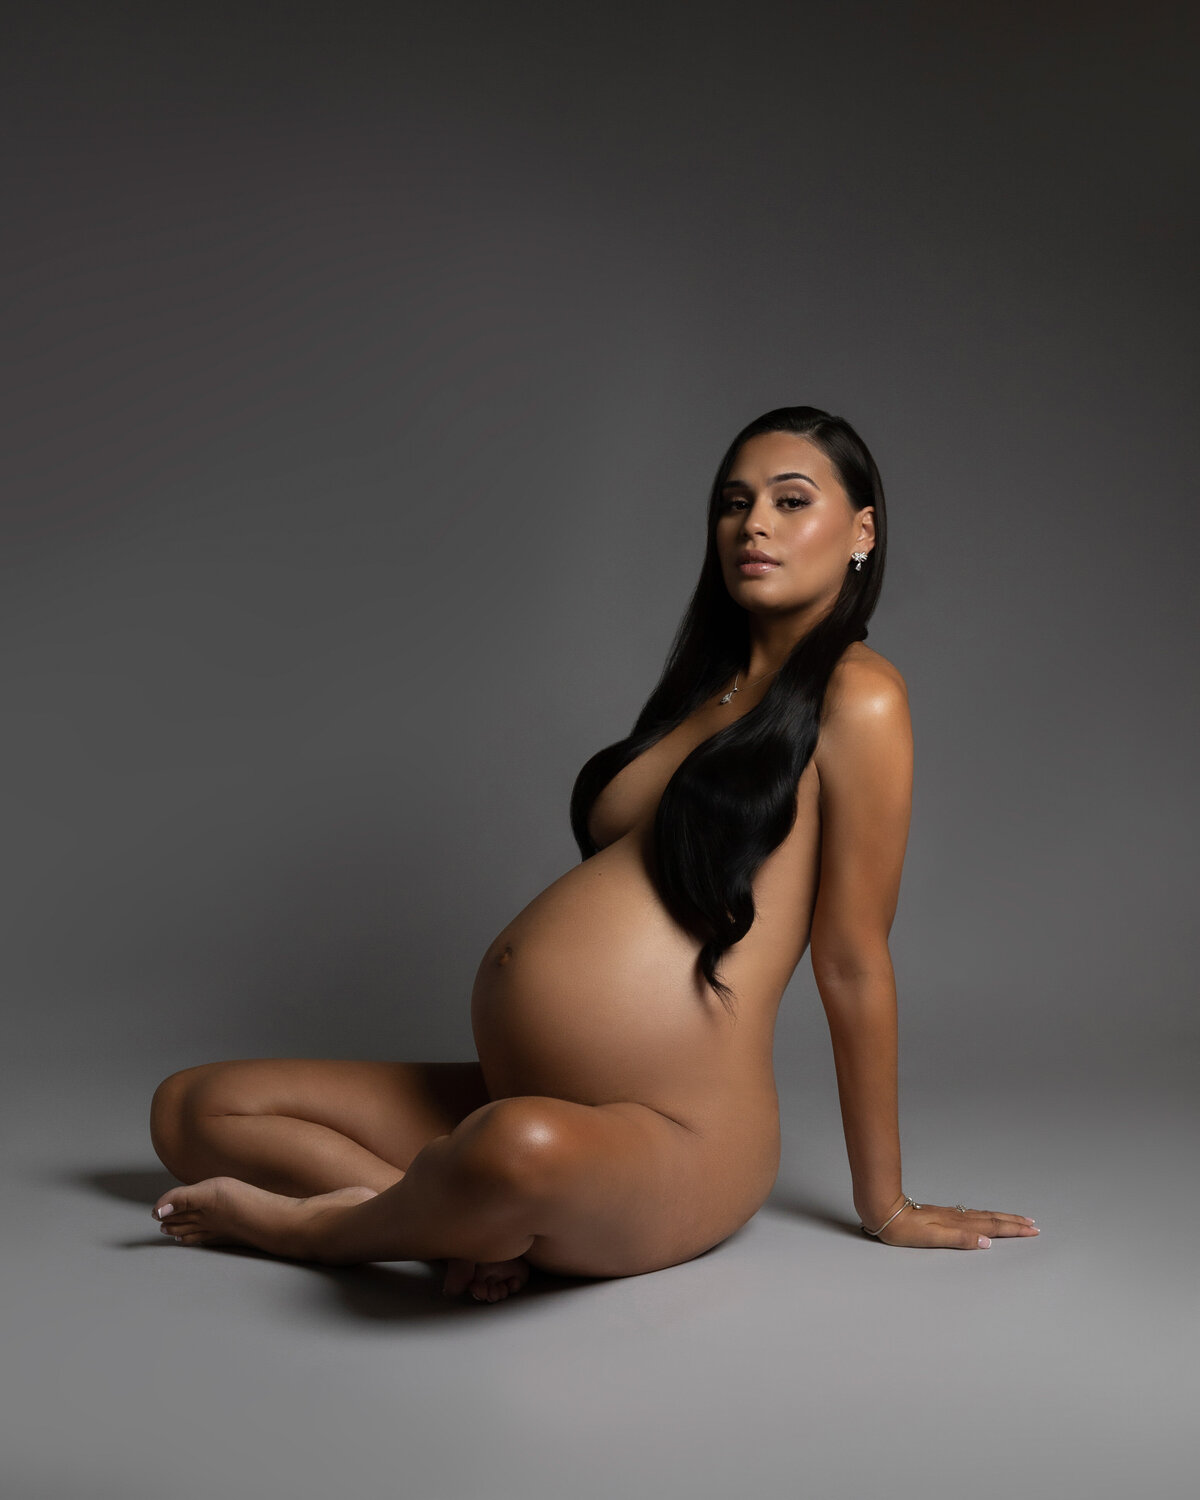 artistic nude maternity in studio by Daisy Rey Photography in New Jersey